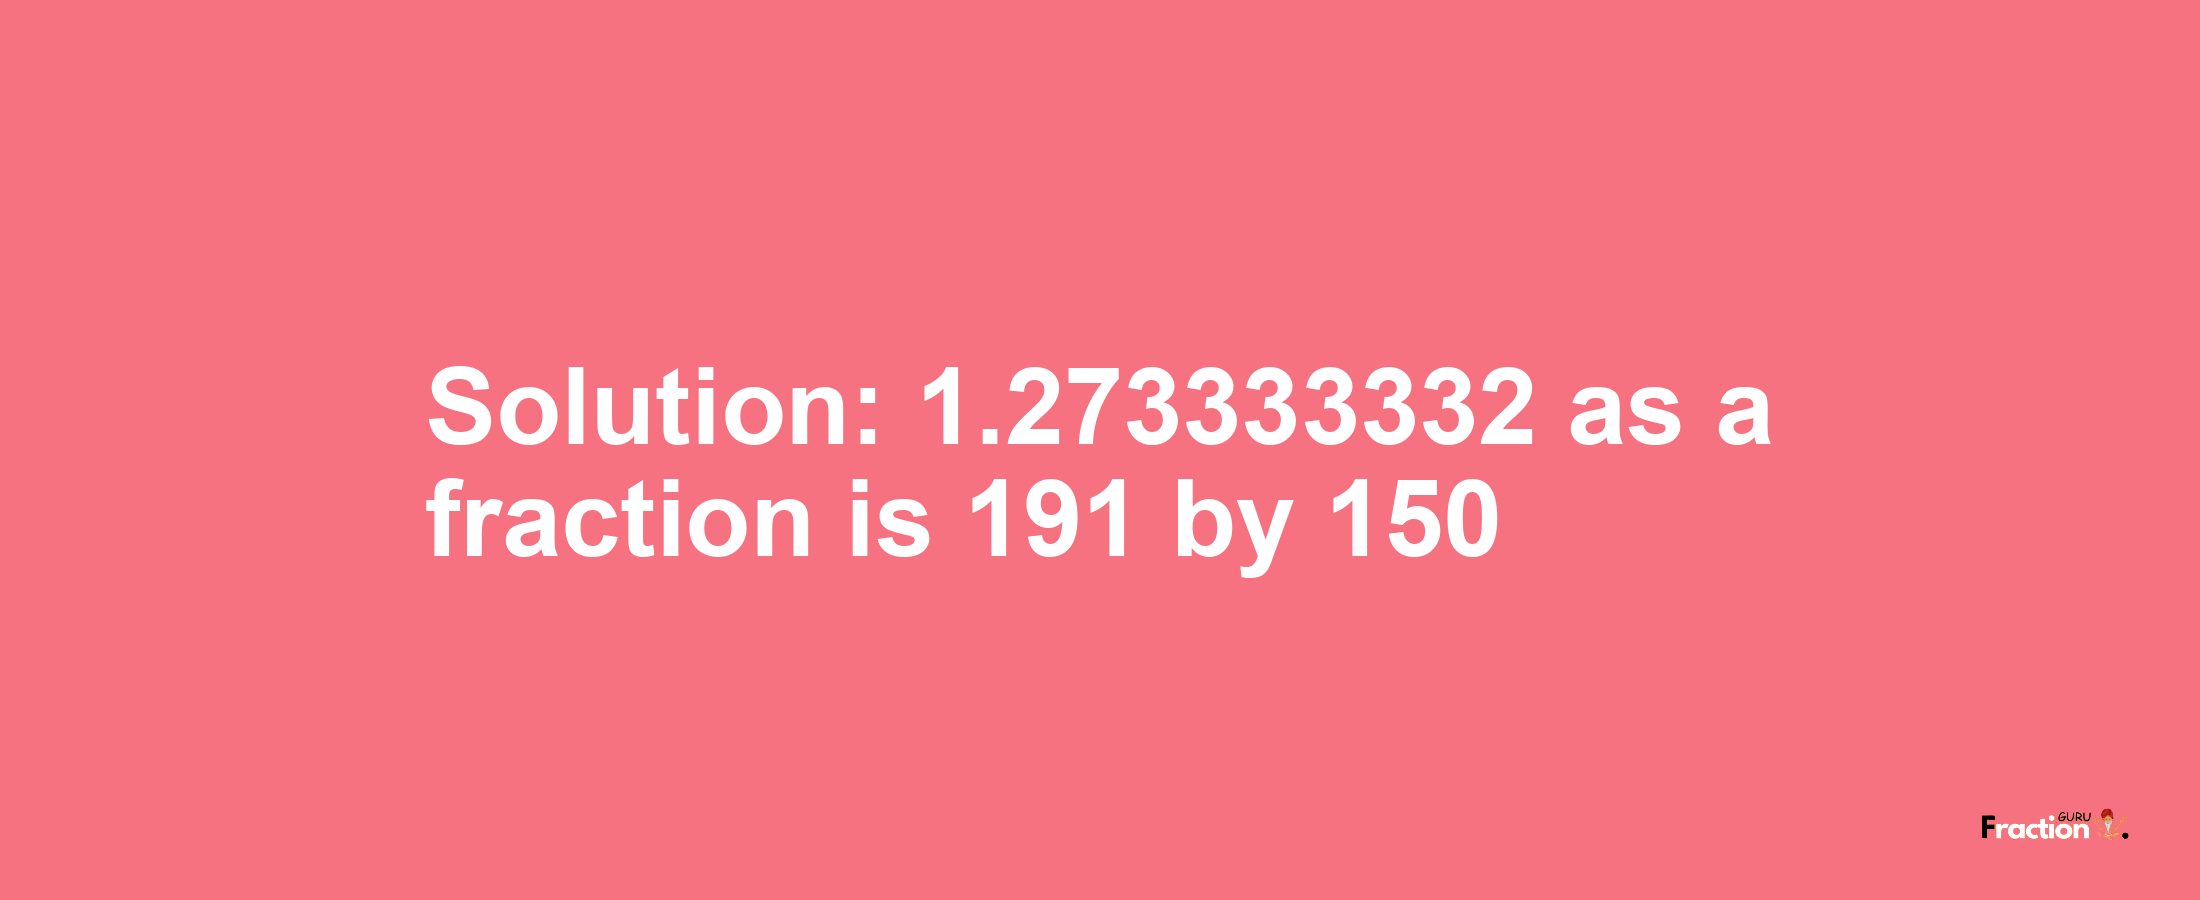 Solution:1.273333332 as a fraction is 191/150